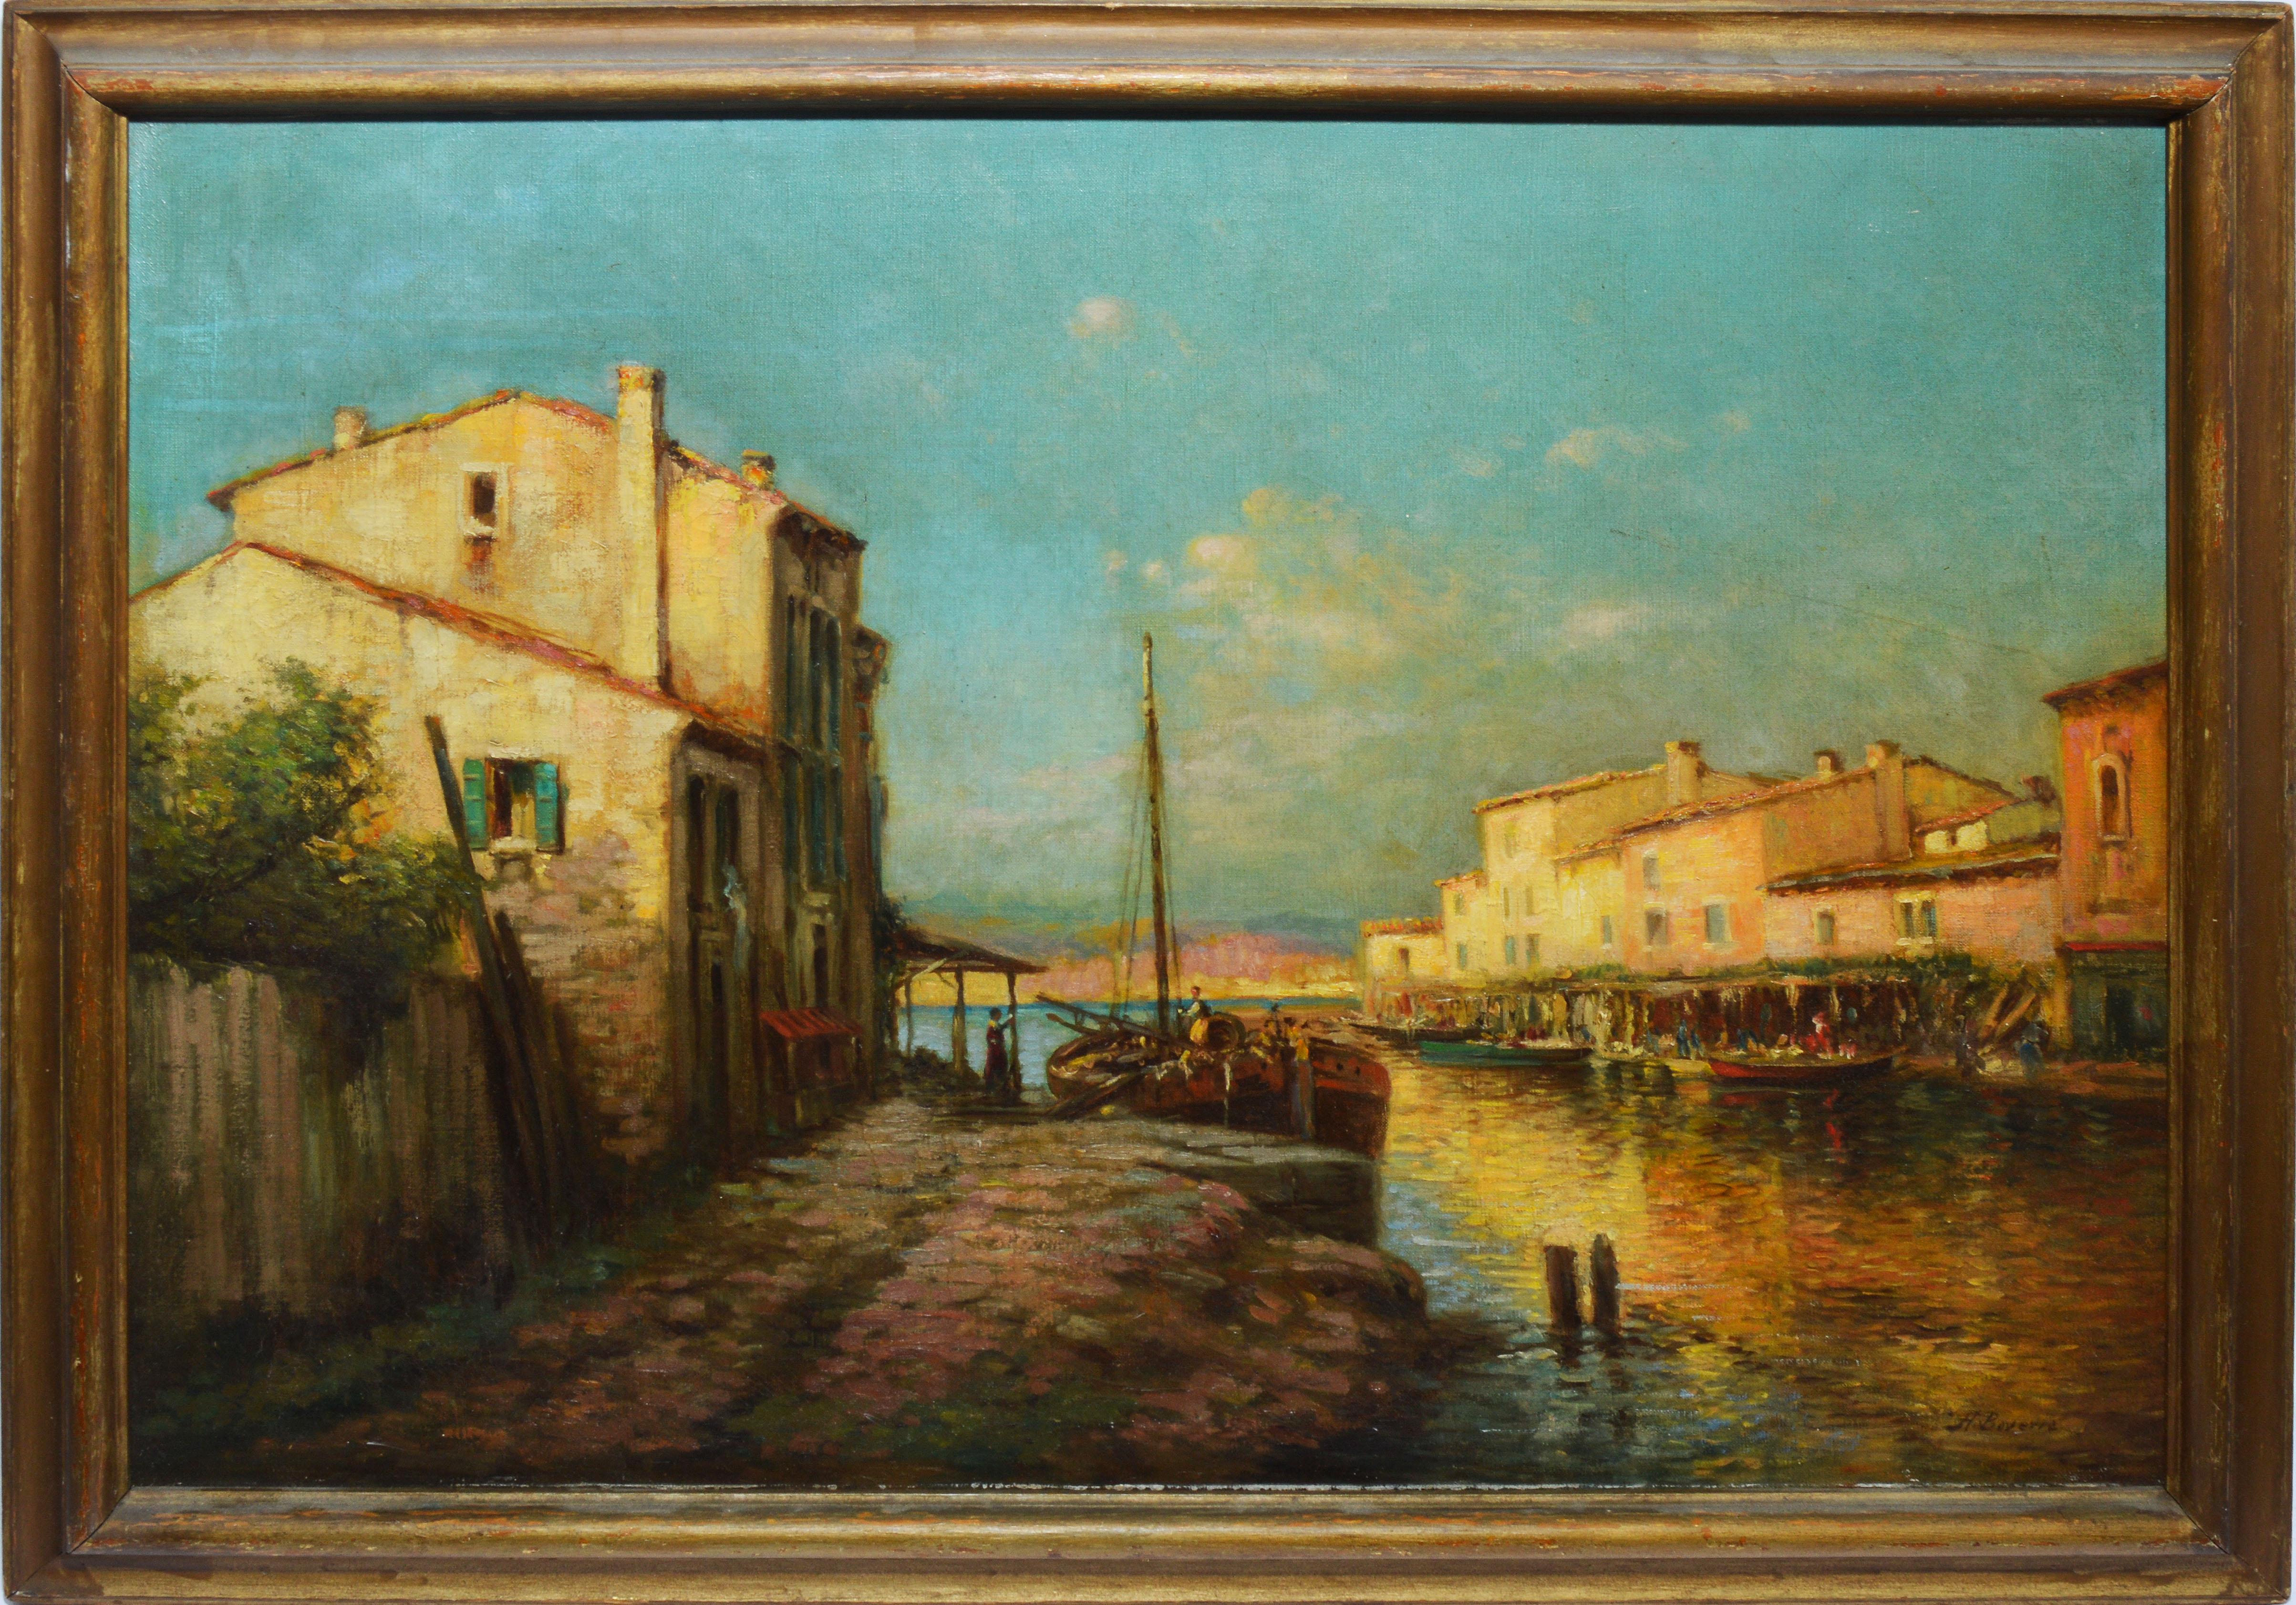 Unknown Landscape Painting - Antique Italian Sunset View of Venice, Large 19th Century Signed Oil Painting